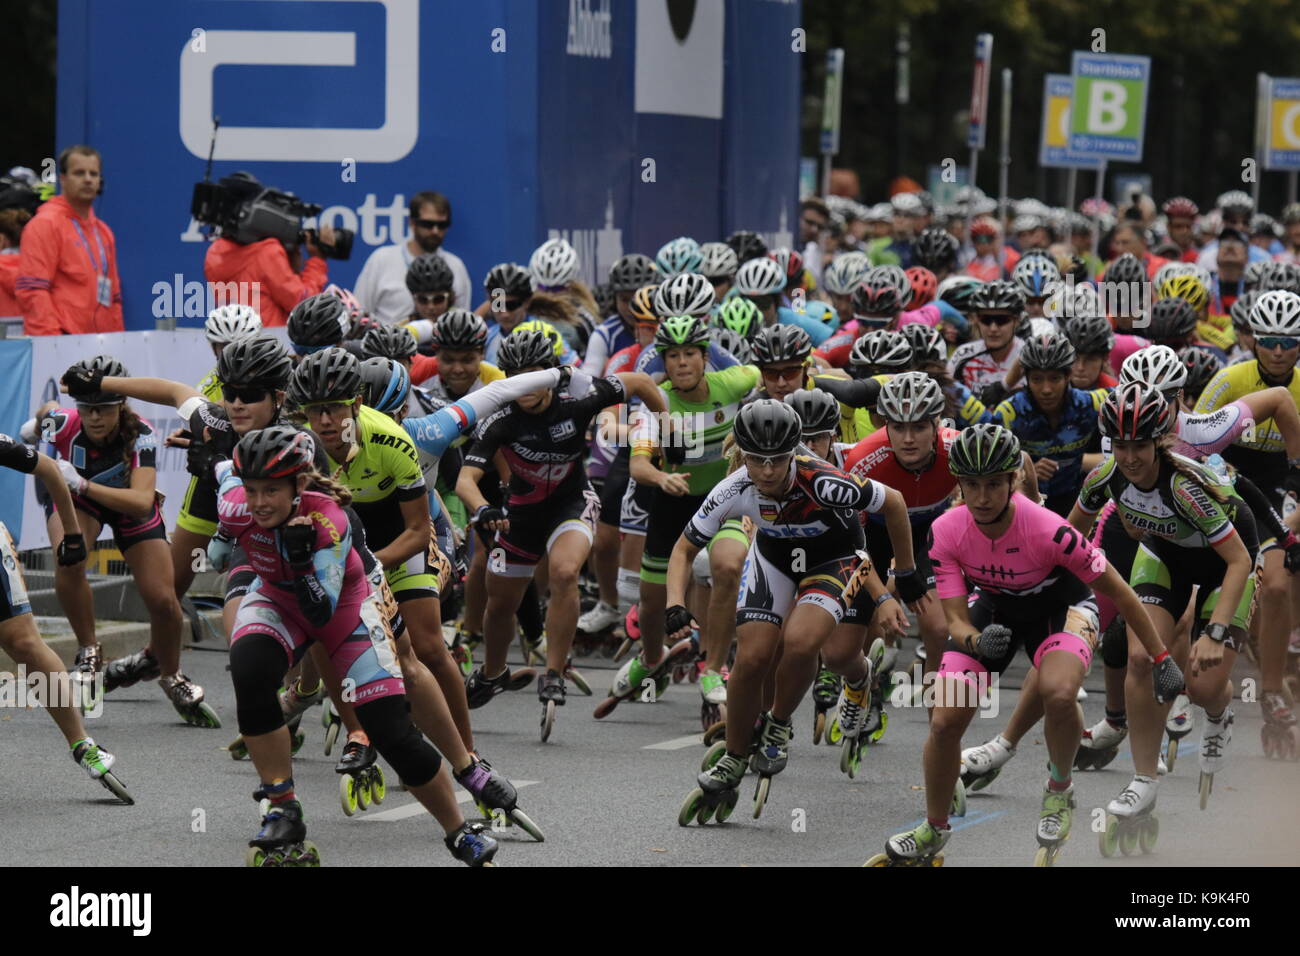 Berlin, Germany. 23rd September 2017. The elite female skaters start the race. Over 5,500 skater took part in the 2017 BMW Berlin Marathon Inline skating race, a day ahead of the  Marathon race. Bart Swings from Belgium won the race in 58:42 for the 5th year in a row. Credit: Michael Debets/Alamy Live News Stock Photo